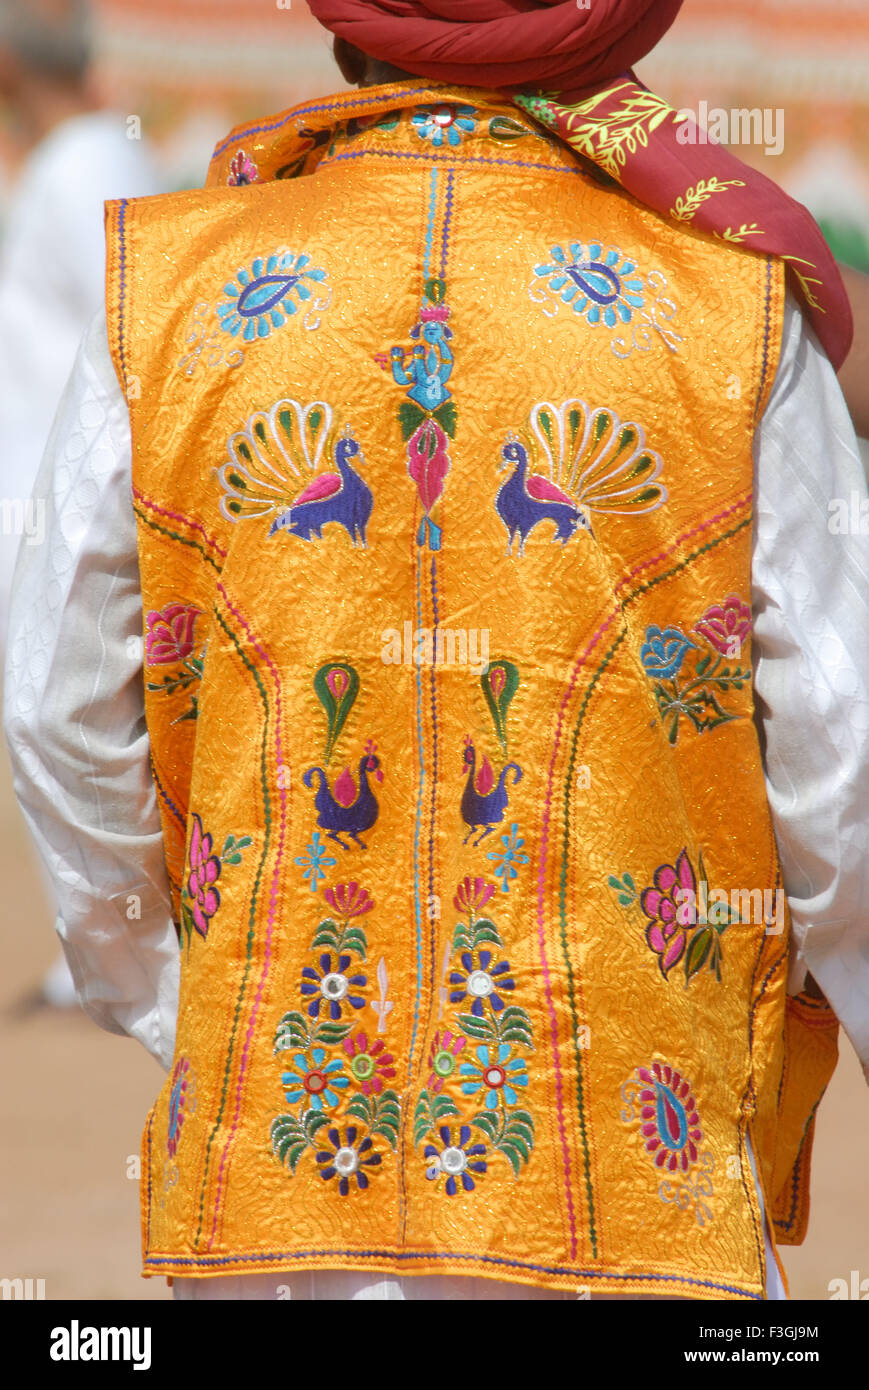 Man wearing embroidered jacket Stock Photo